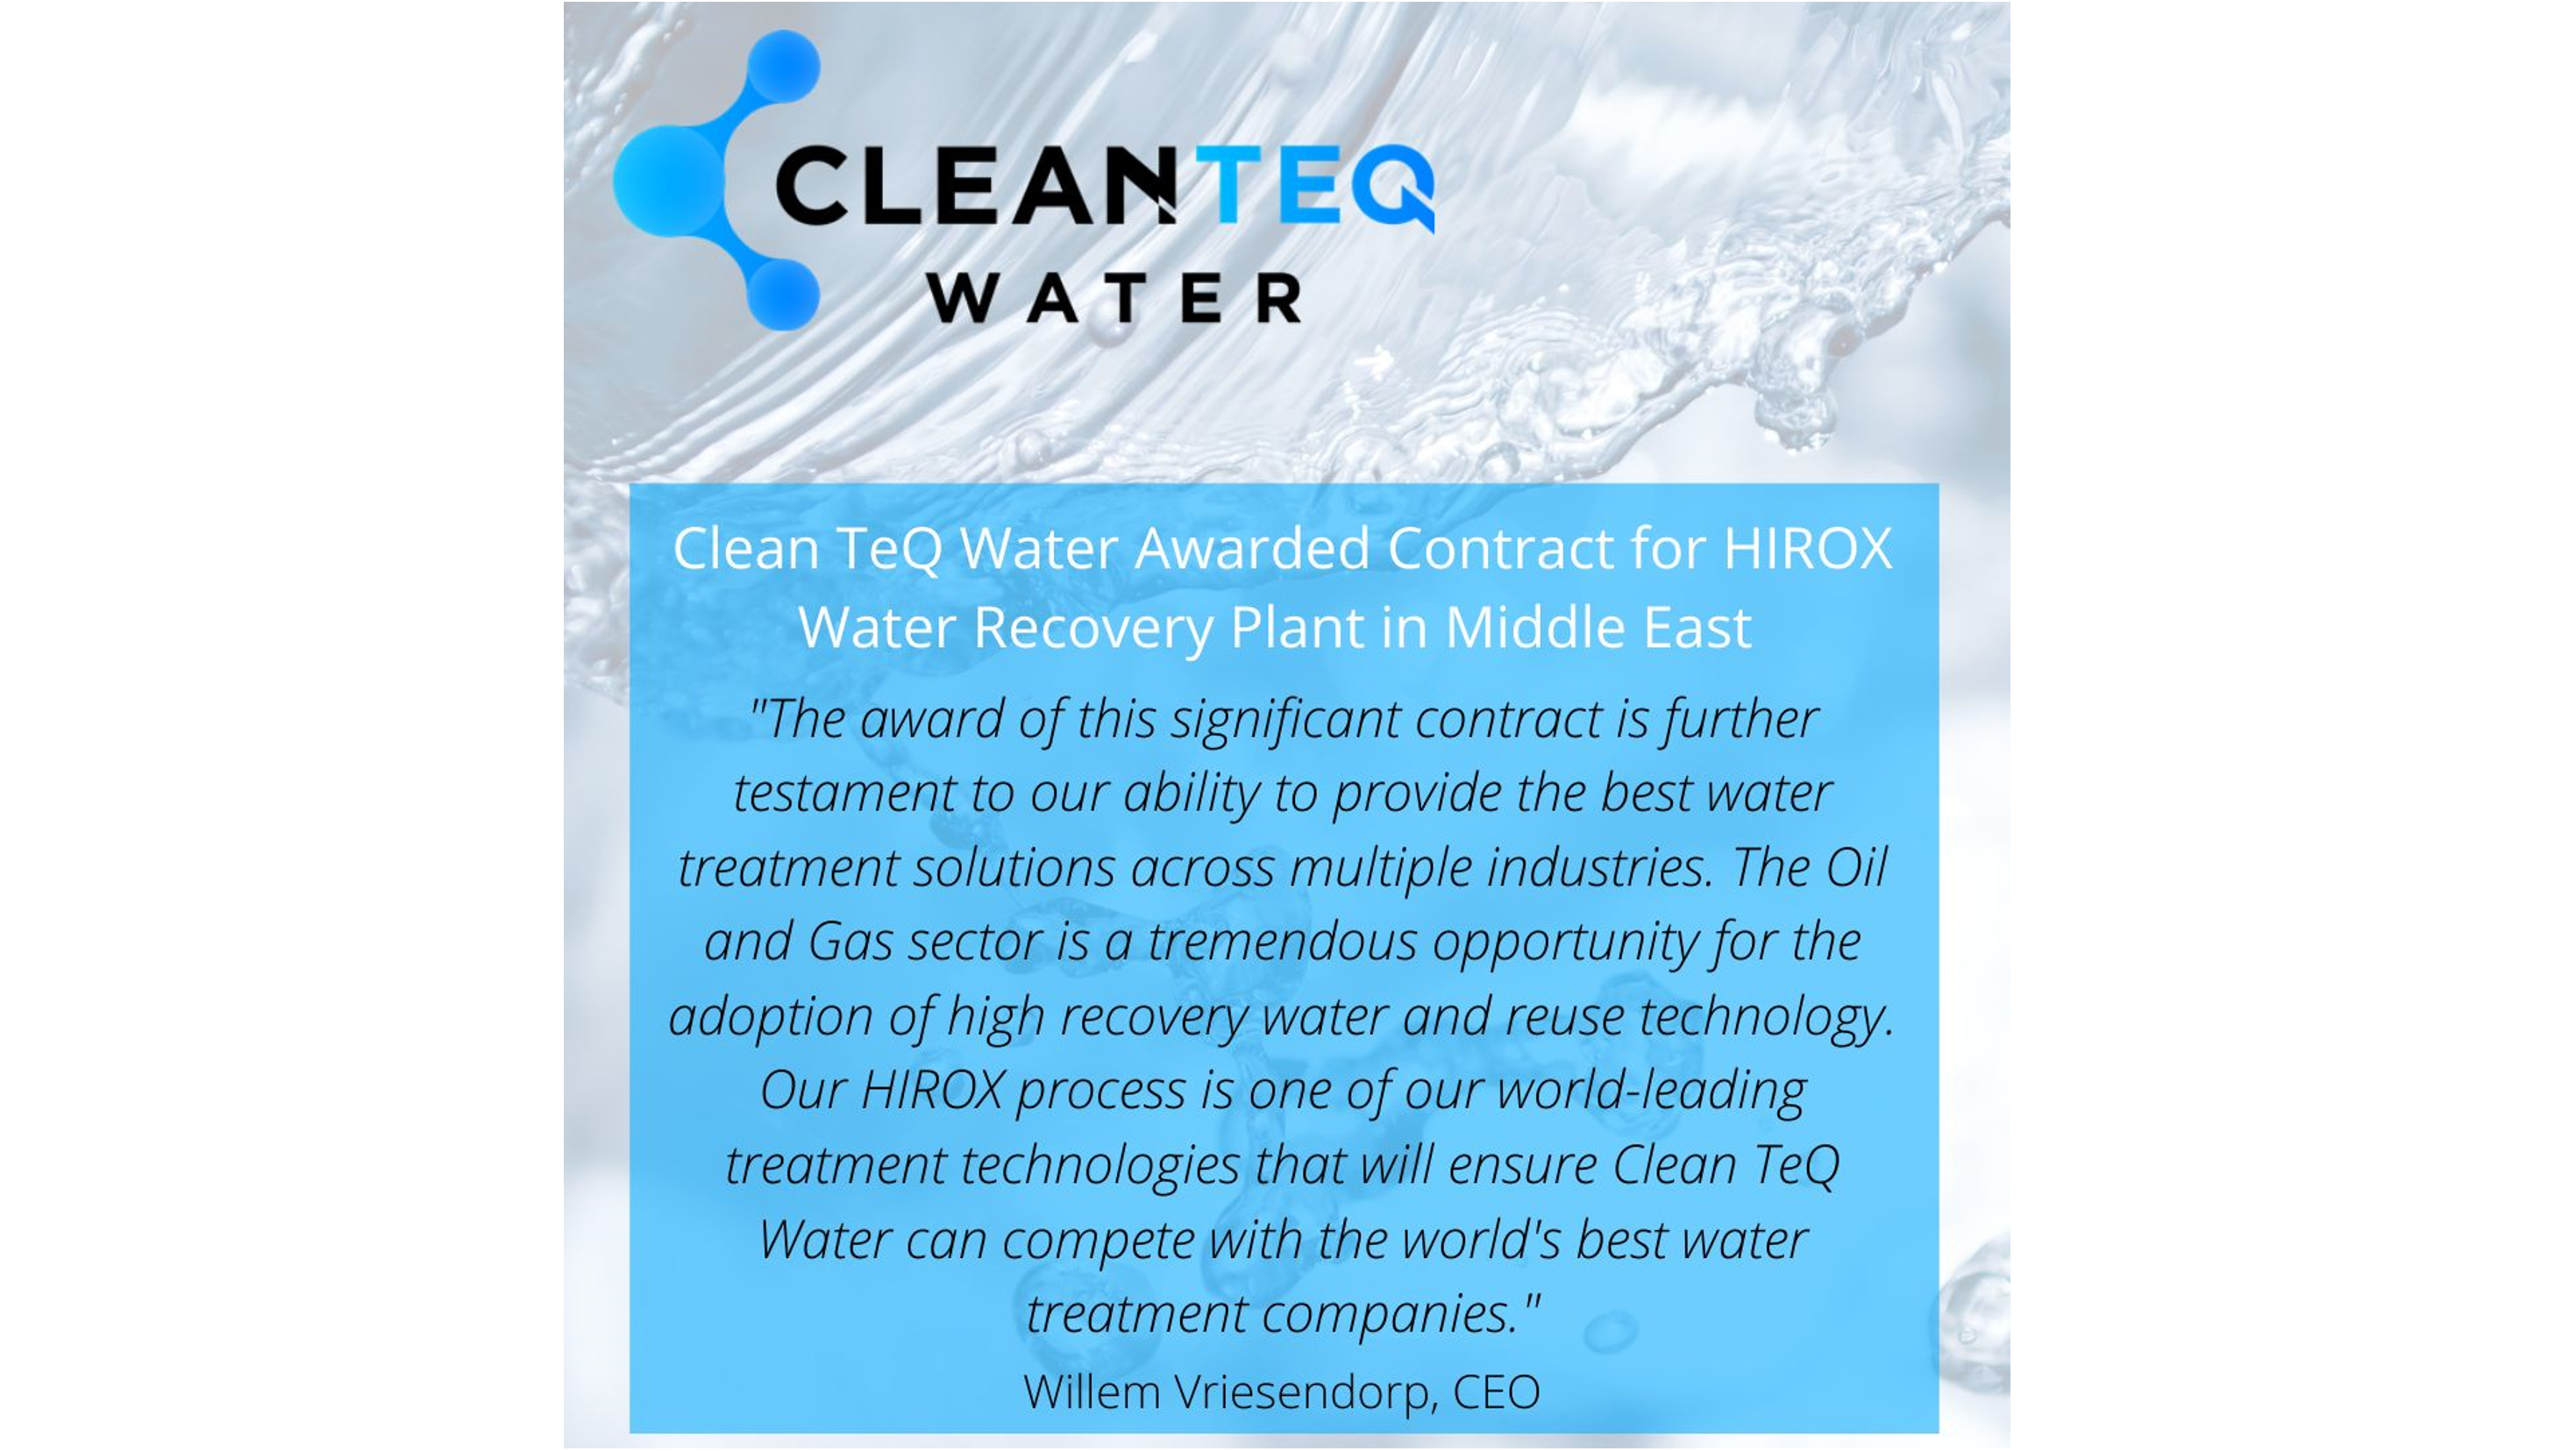 Clean TeQ Water Awarded Contract for HIROX Water Recovery Plant in Middle East